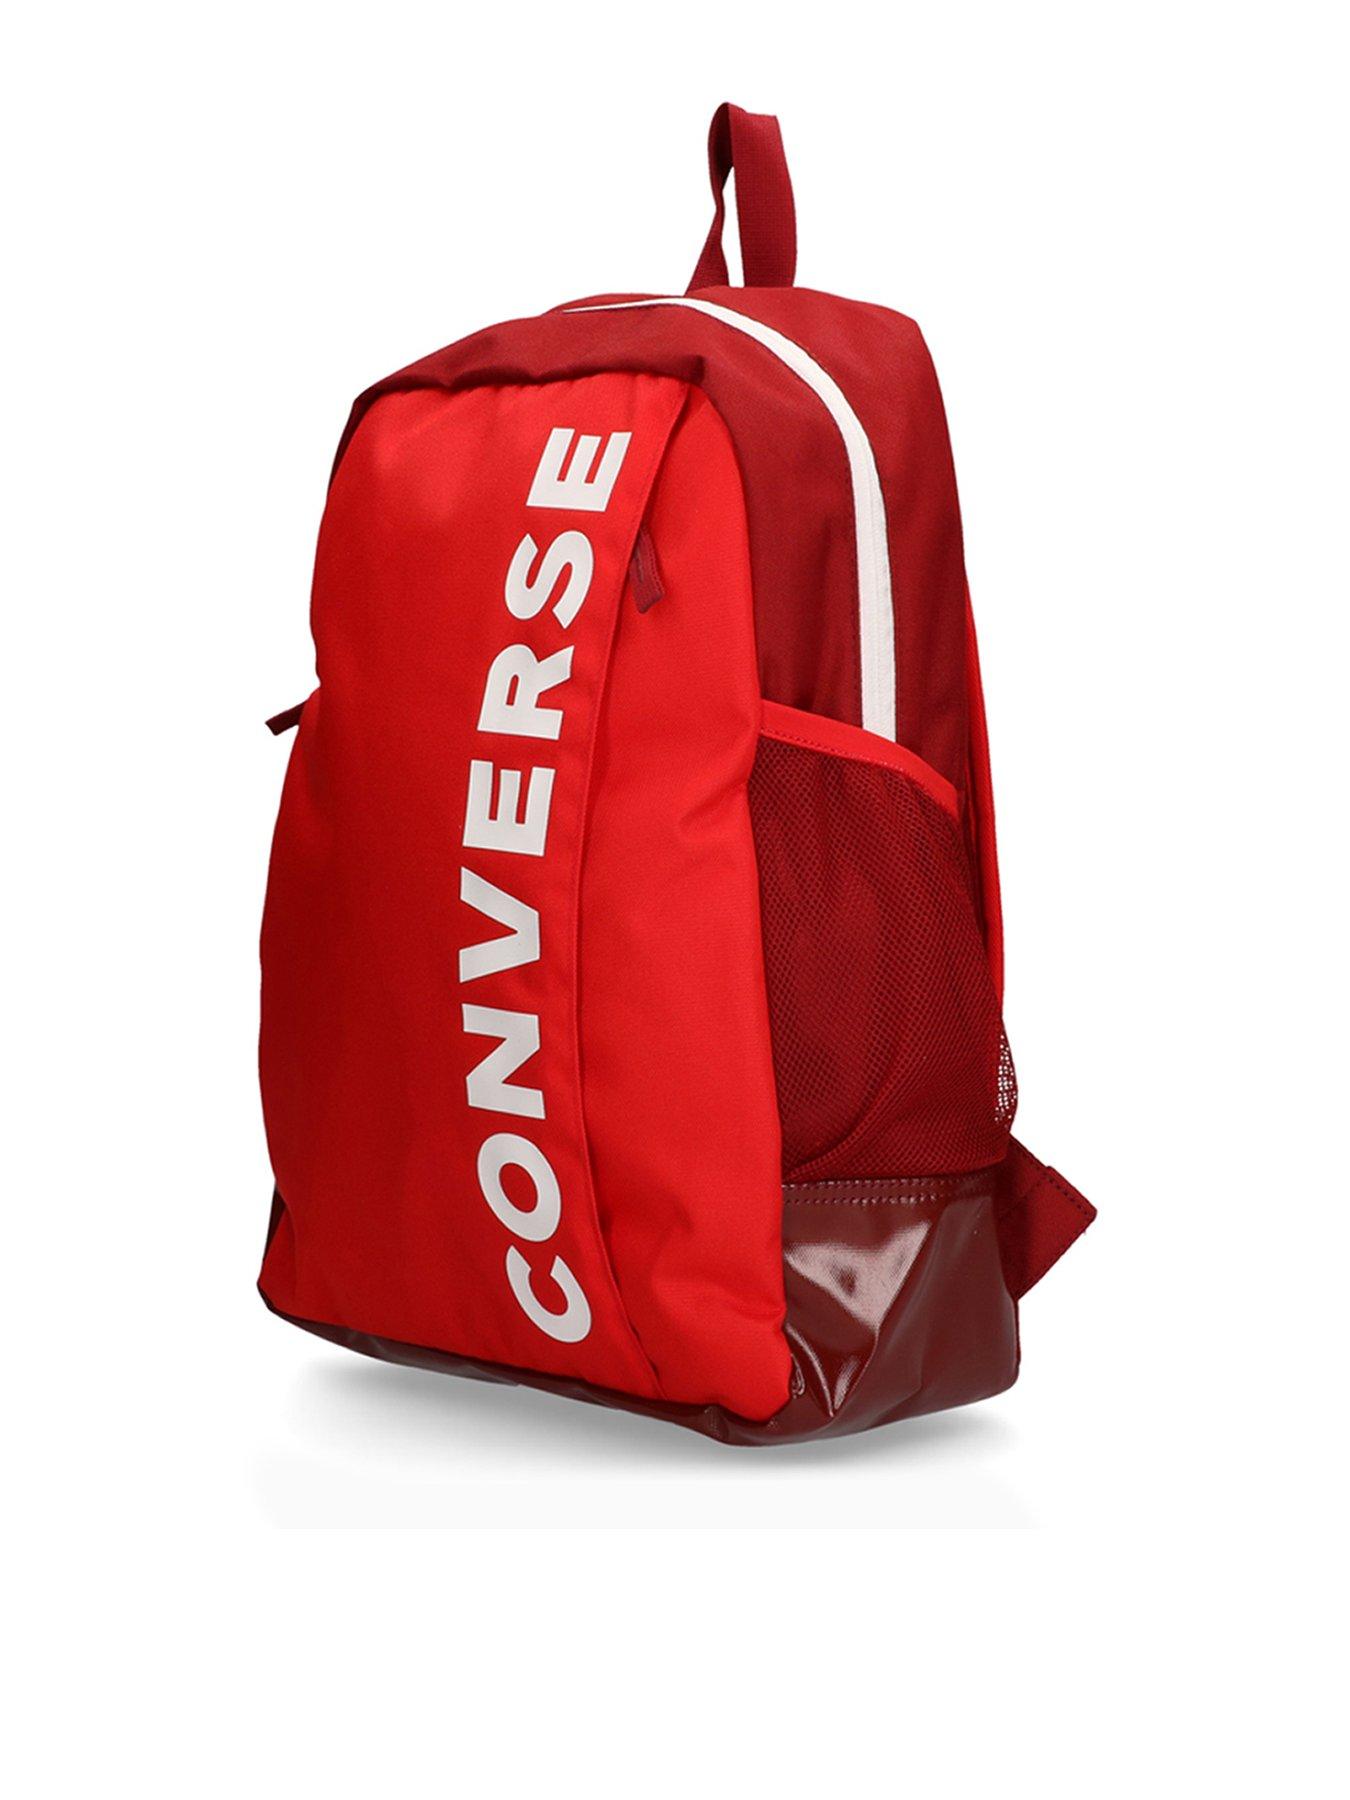 converse take out backpack